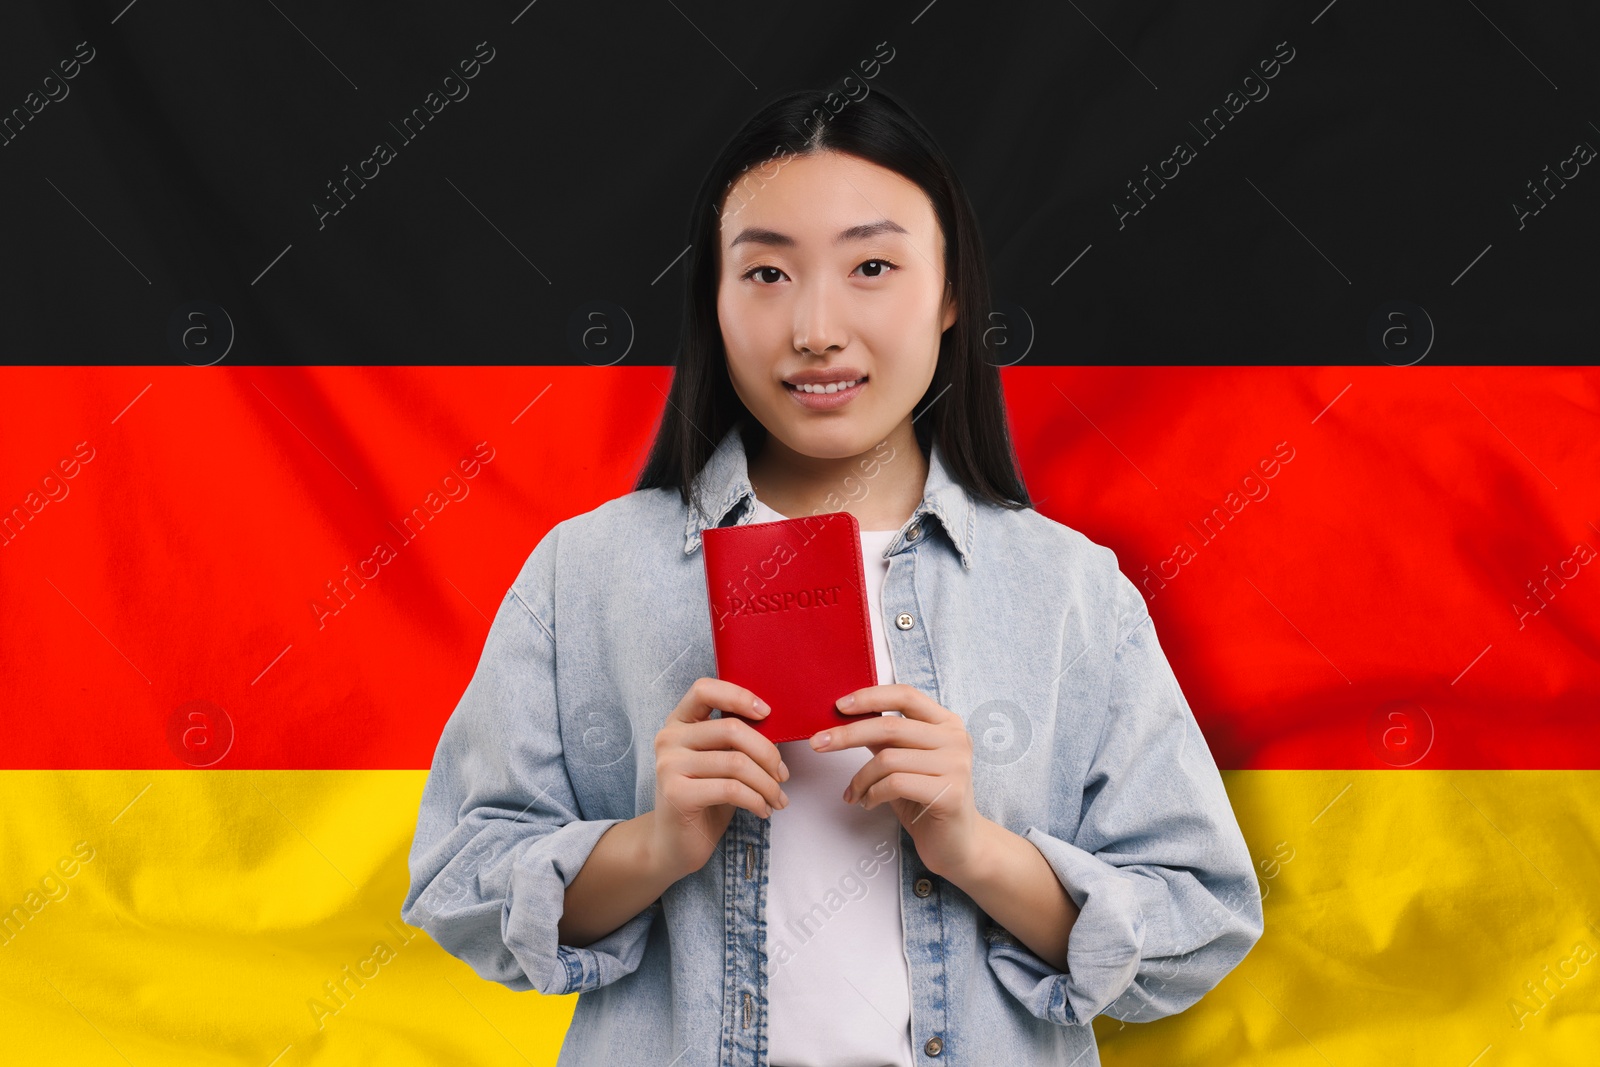 Image of Immigration. Woman with passport against national flag of Germany